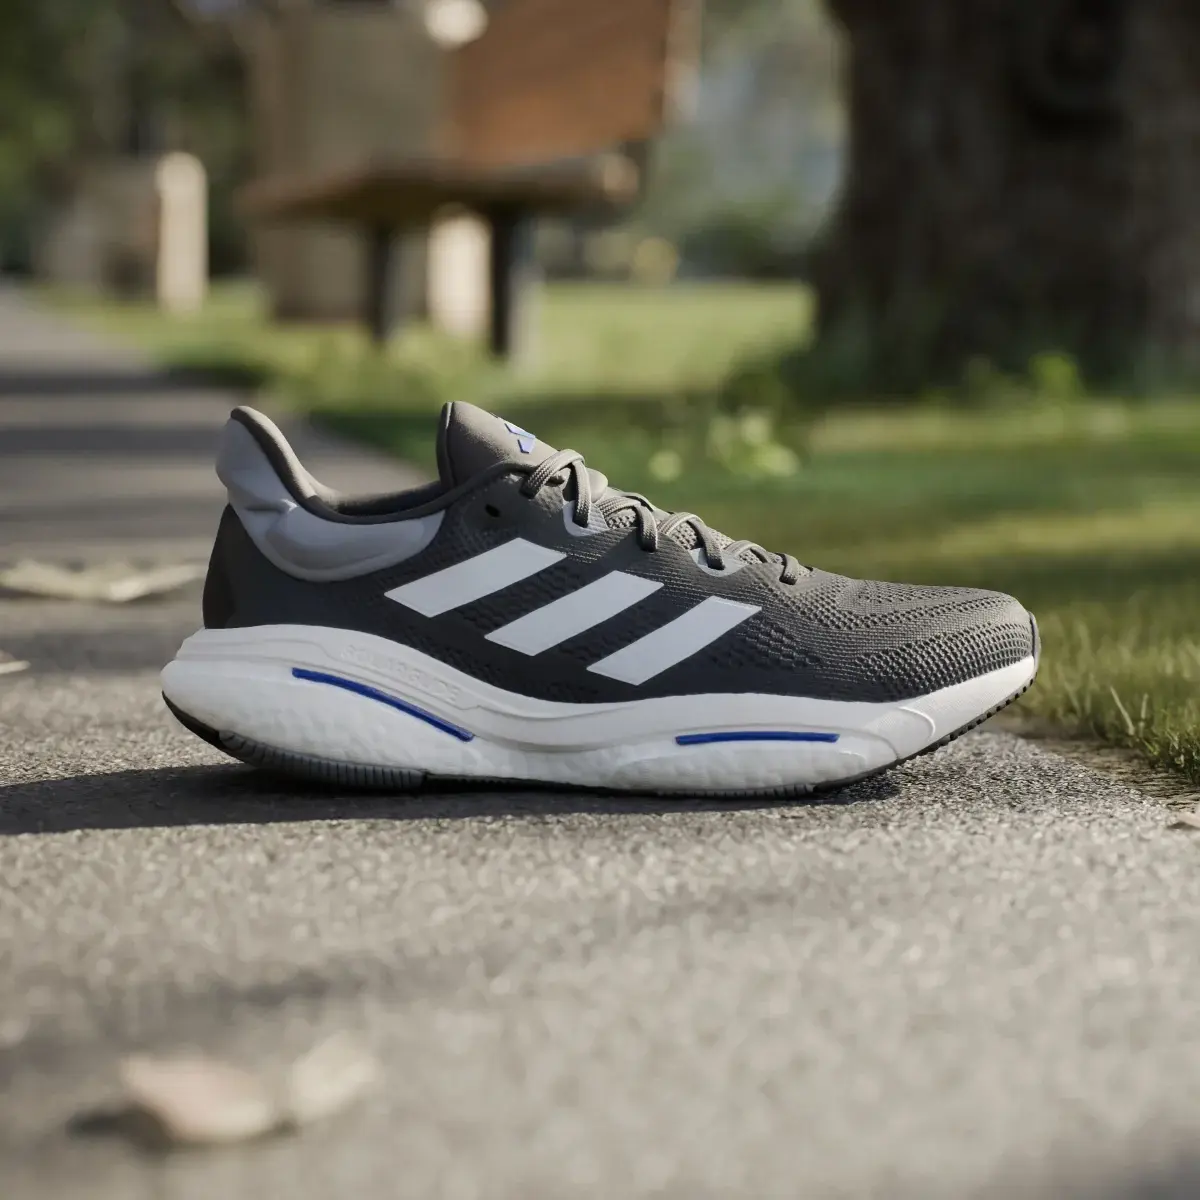 Adidas SOLARGLIDE 6 Shoes. 2